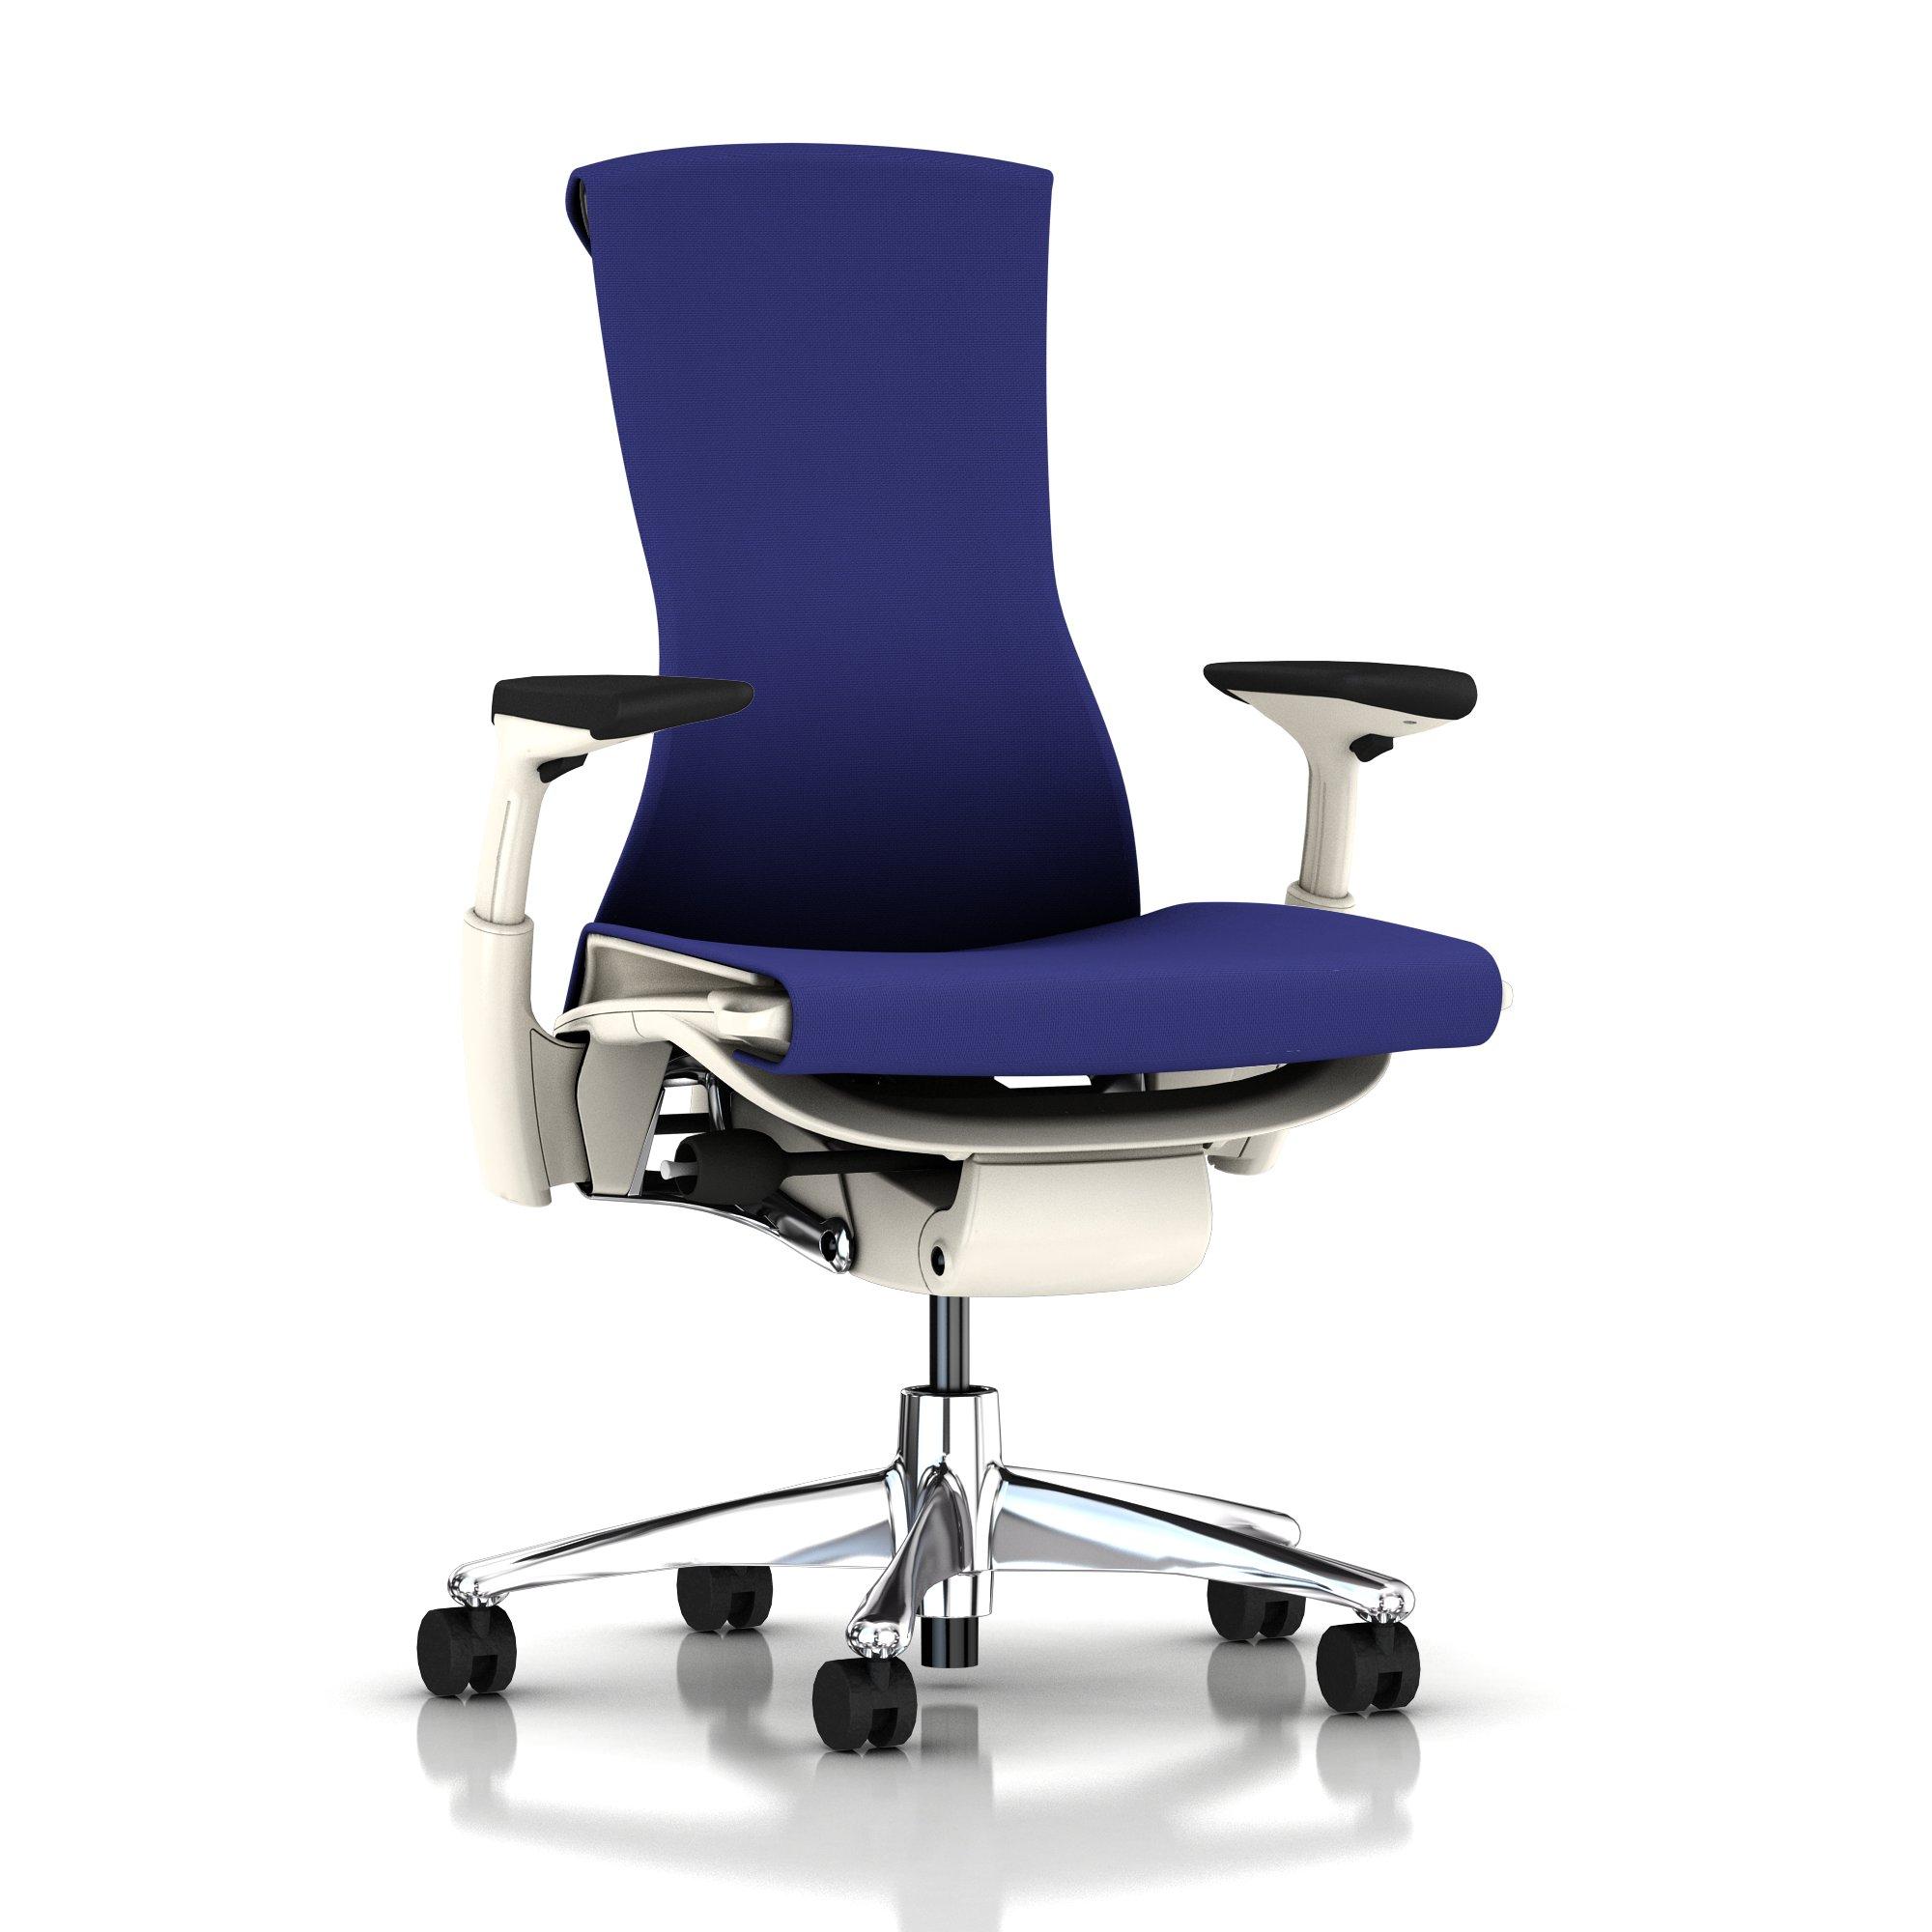 Embody Chair Iris Blue Rhythm with White Frame and Aluminum Base by Herman Miller